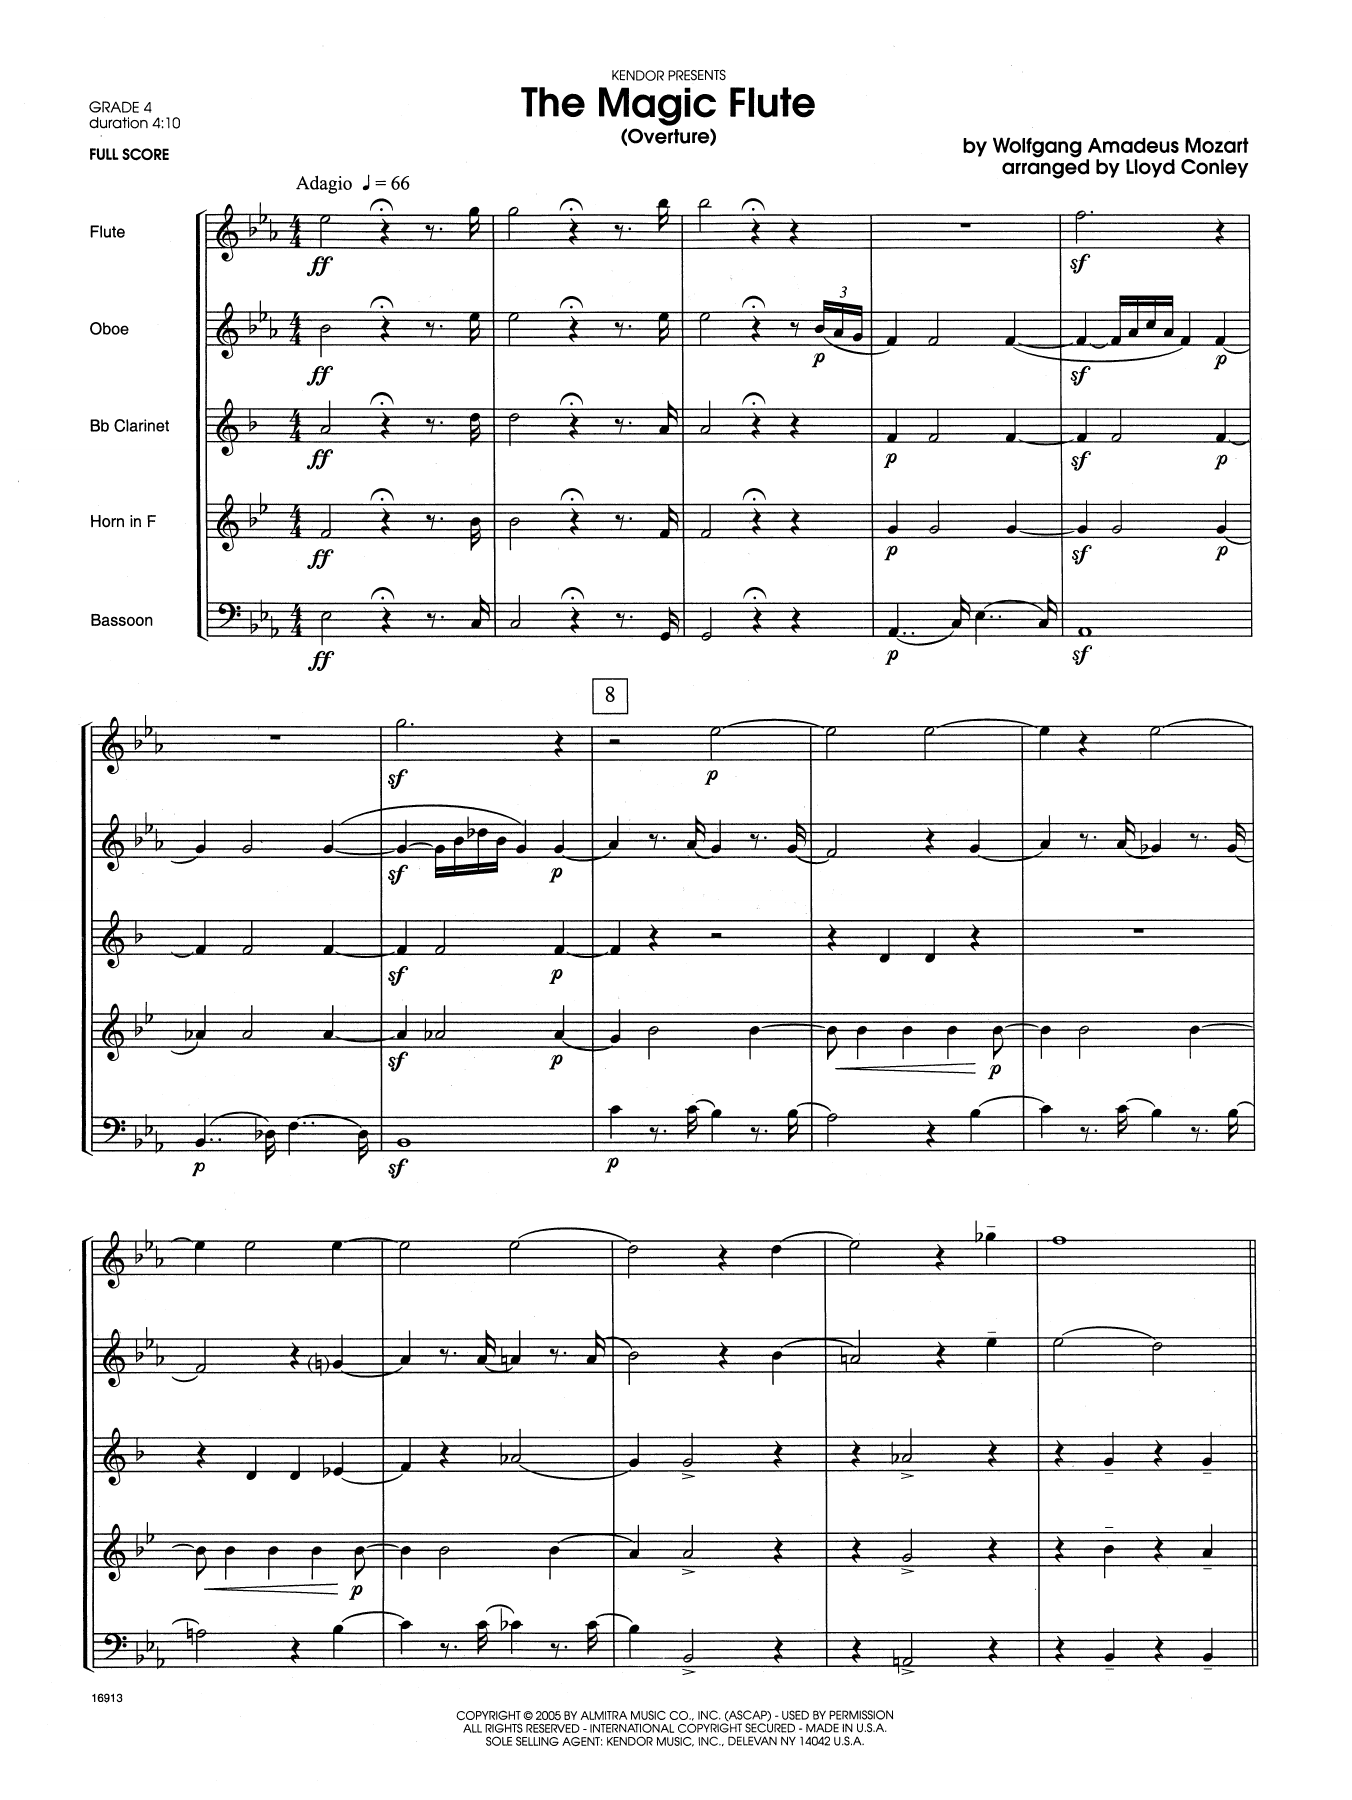 Lloyd Conley The Magic Flute (Overture) - Full Score sheet music notes and chords. Download Printable PDF.